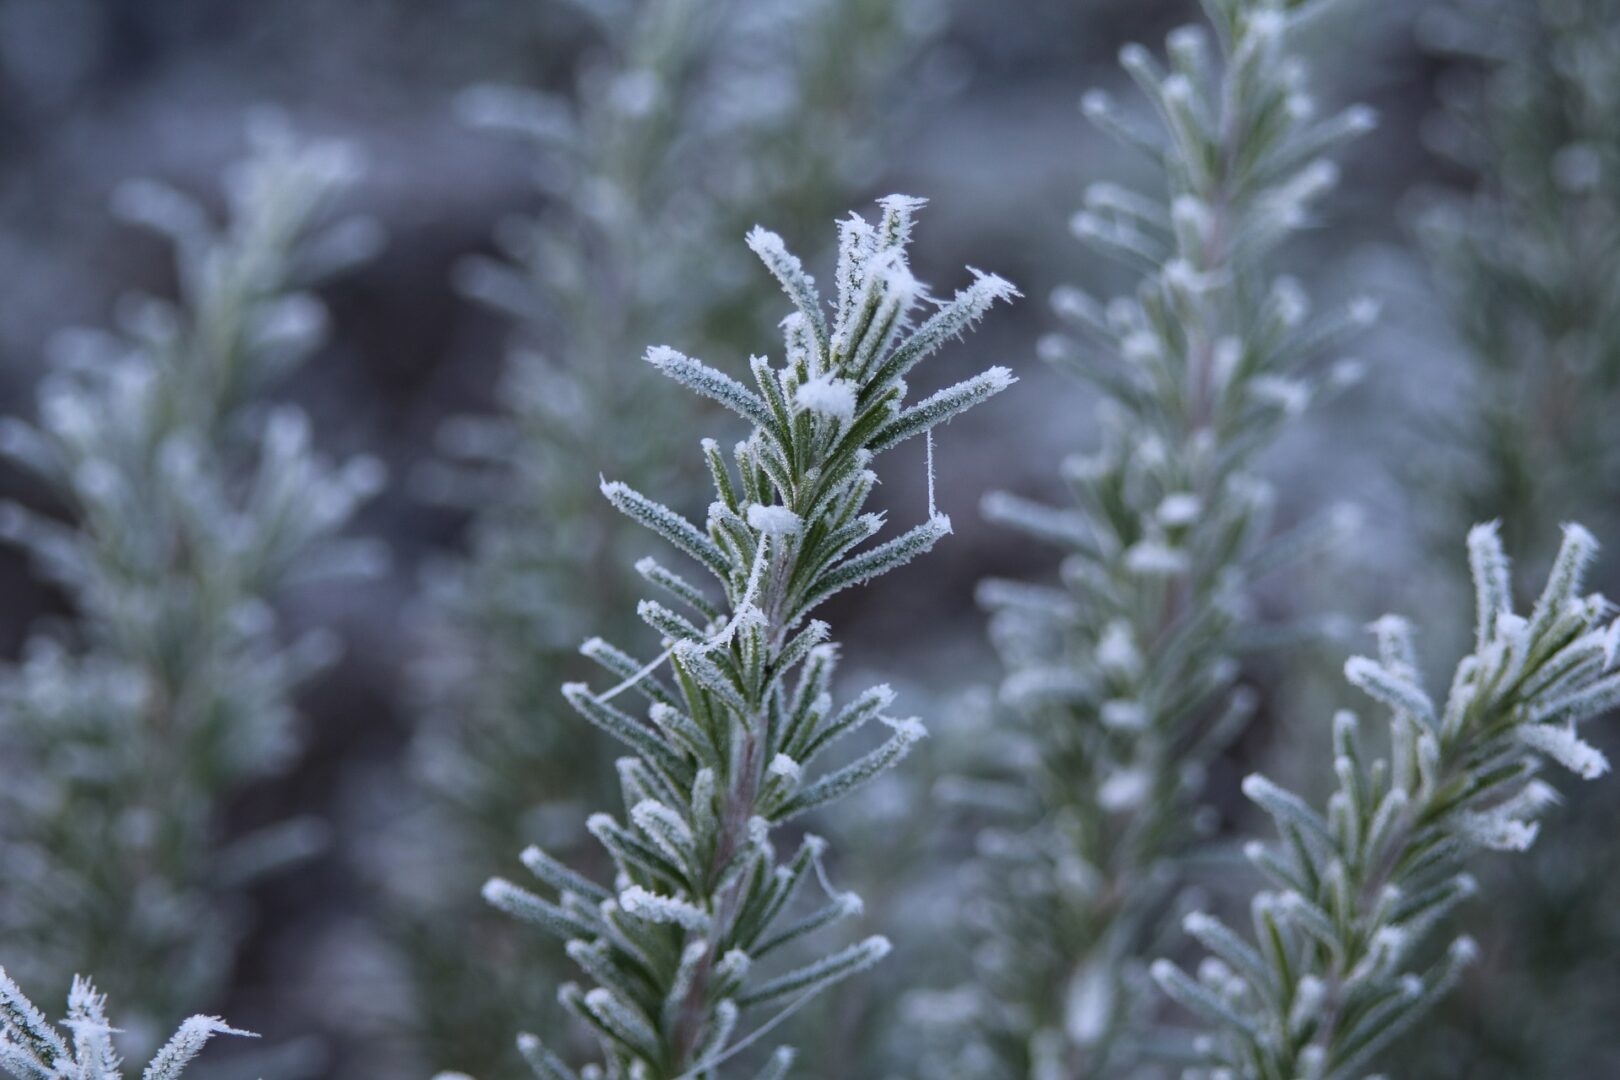 Rosemary that has been frozen by a light winter frost